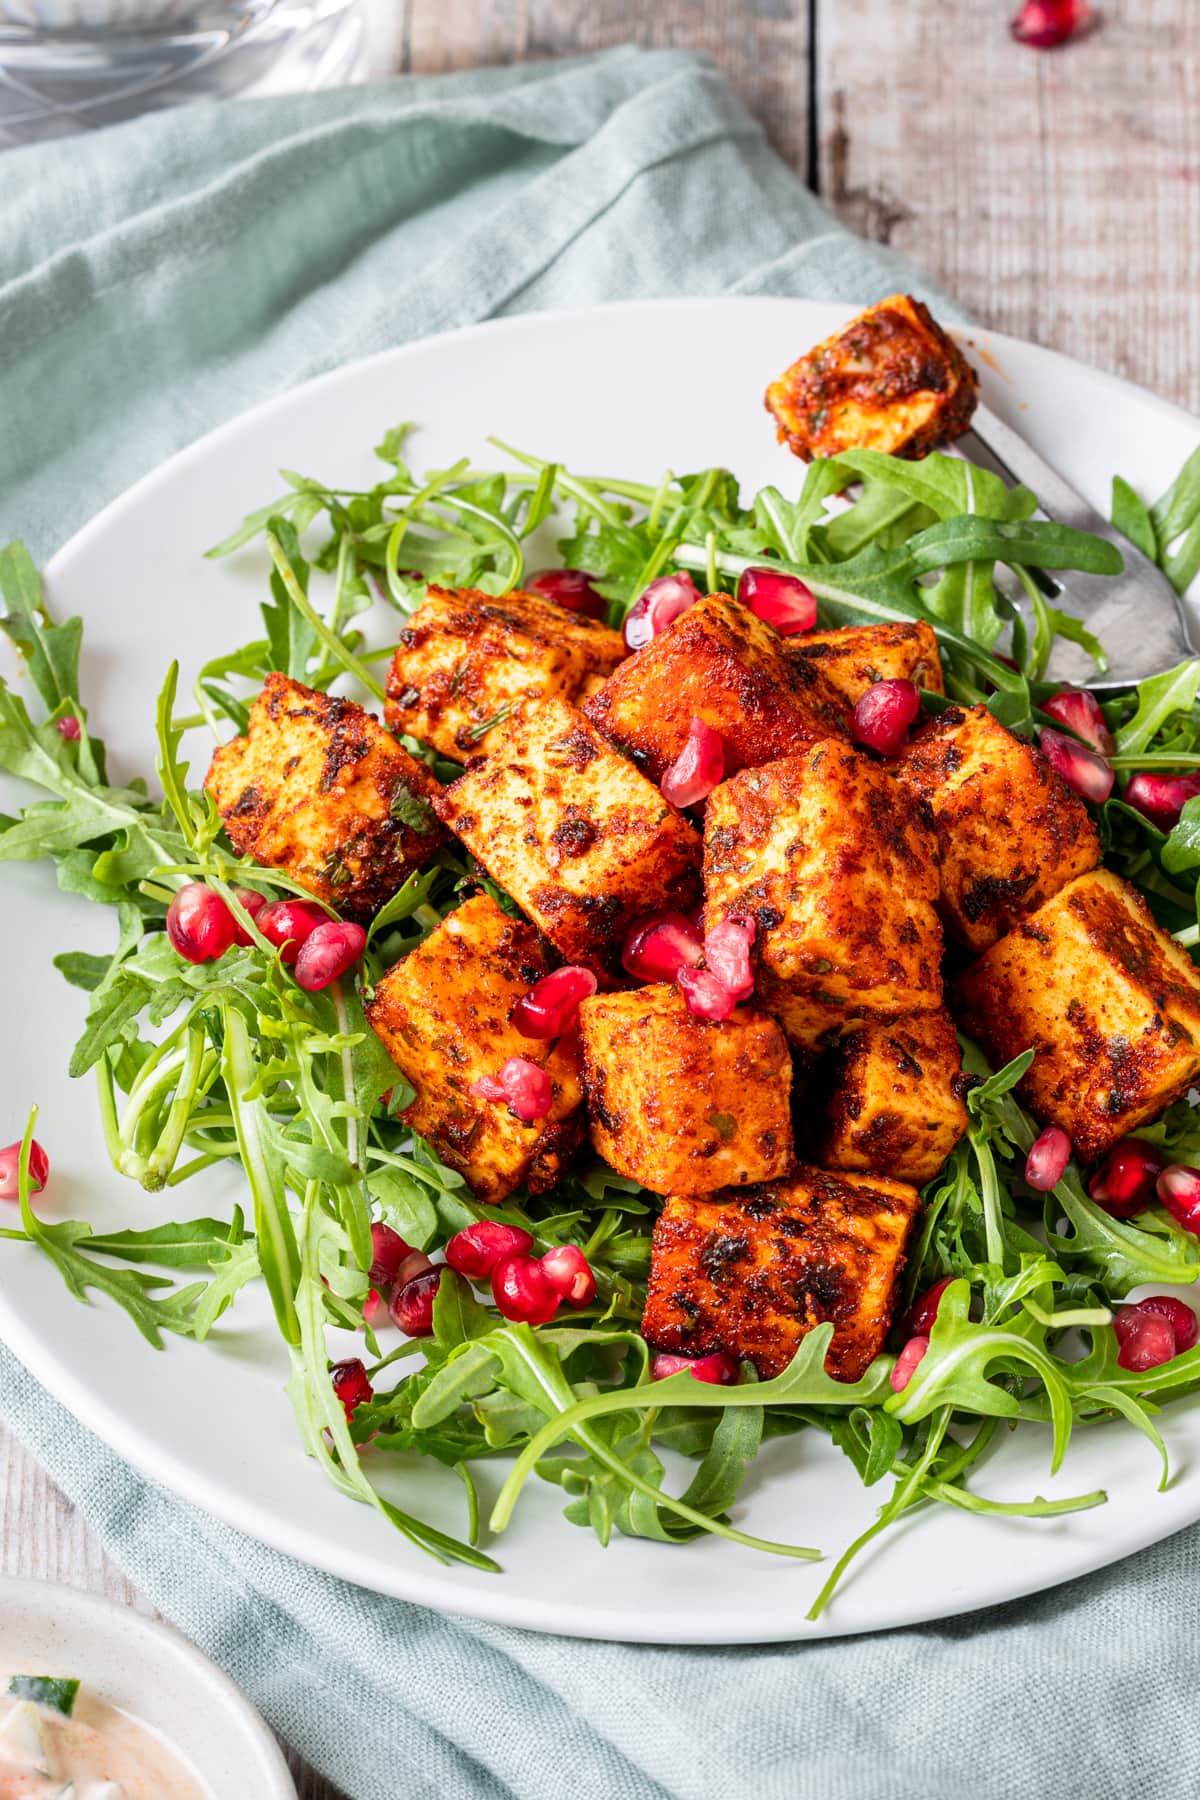 marinated paneer with salad and pomegranate seeds